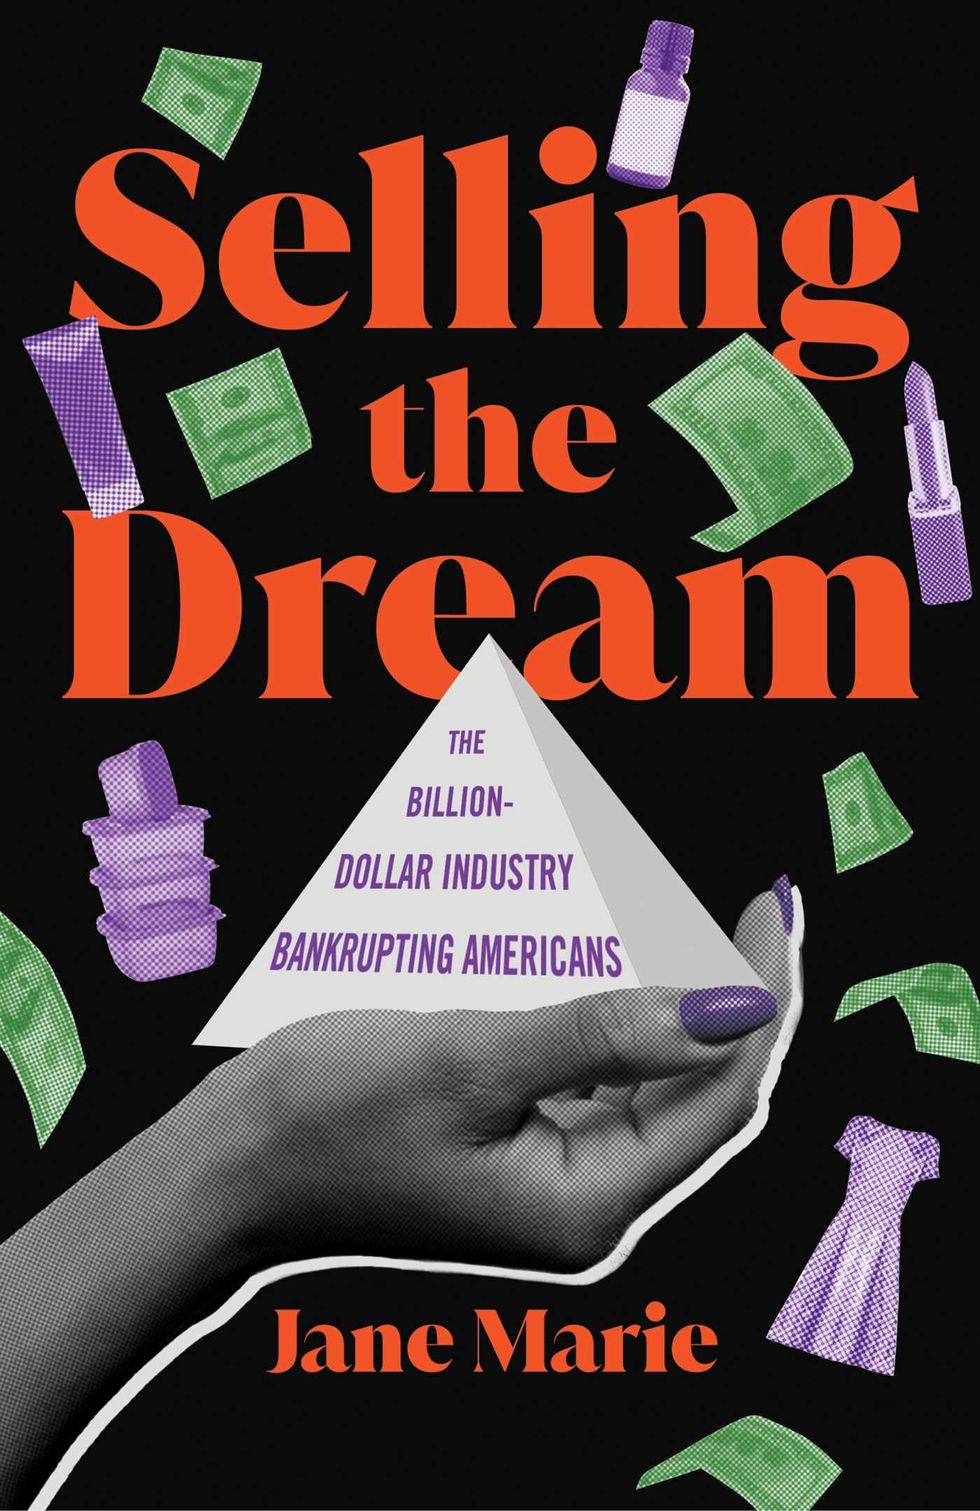 <i>Selling the Dream: The Billion-Dollar Industry Bankrupting Americans</i>, by Jane Marie